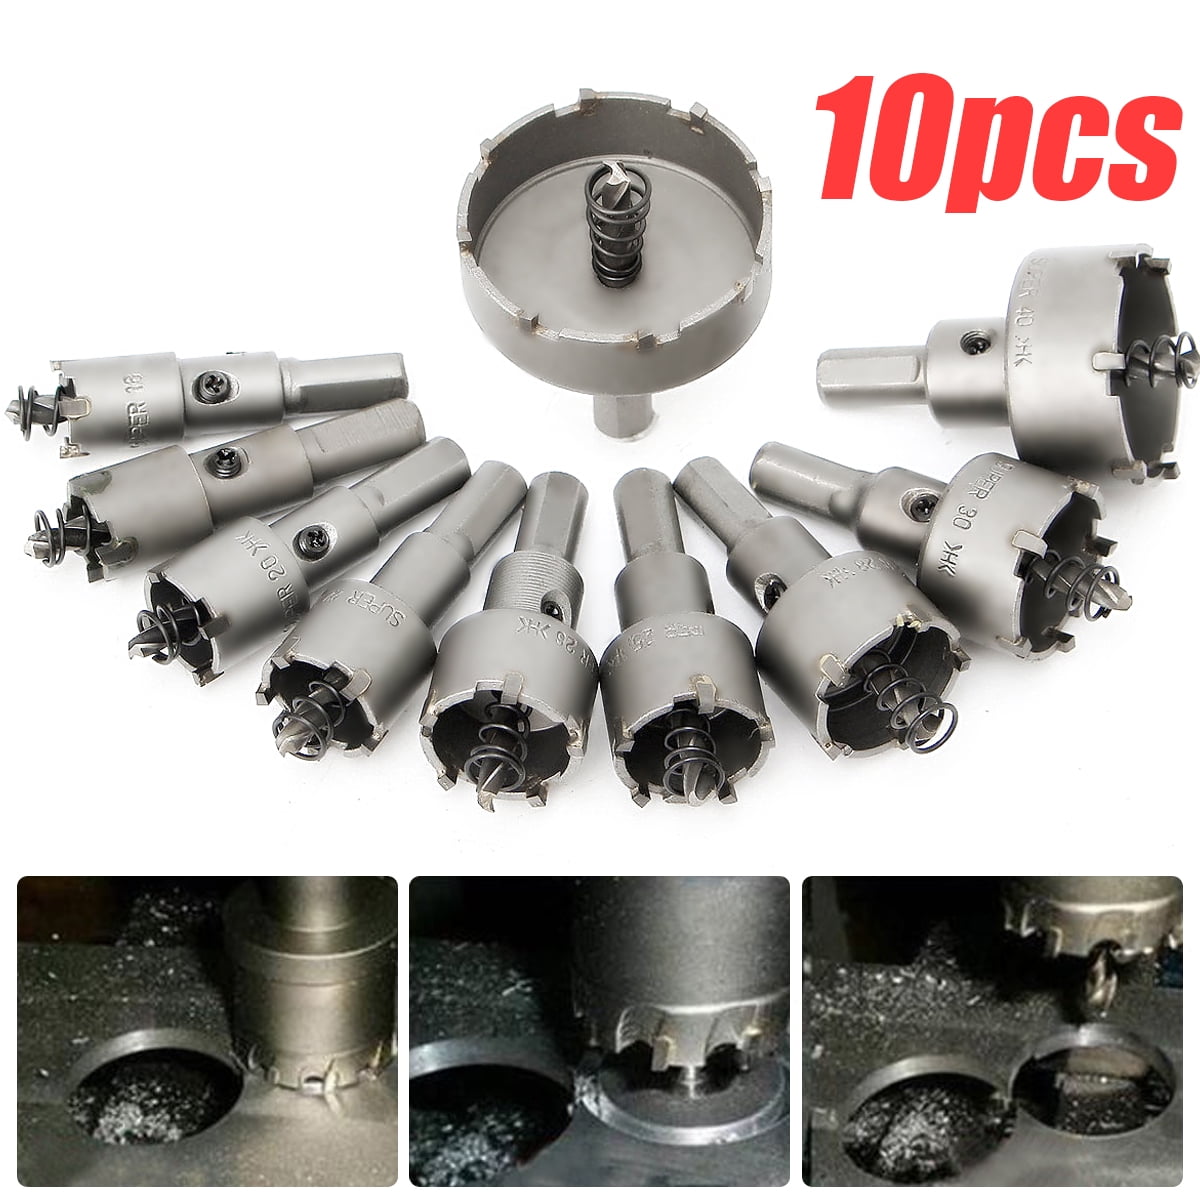 Heavy Duty HSS Carbide Tip Hole Hole Saw Multiple-tooth Drill Bits Cutting Tools 